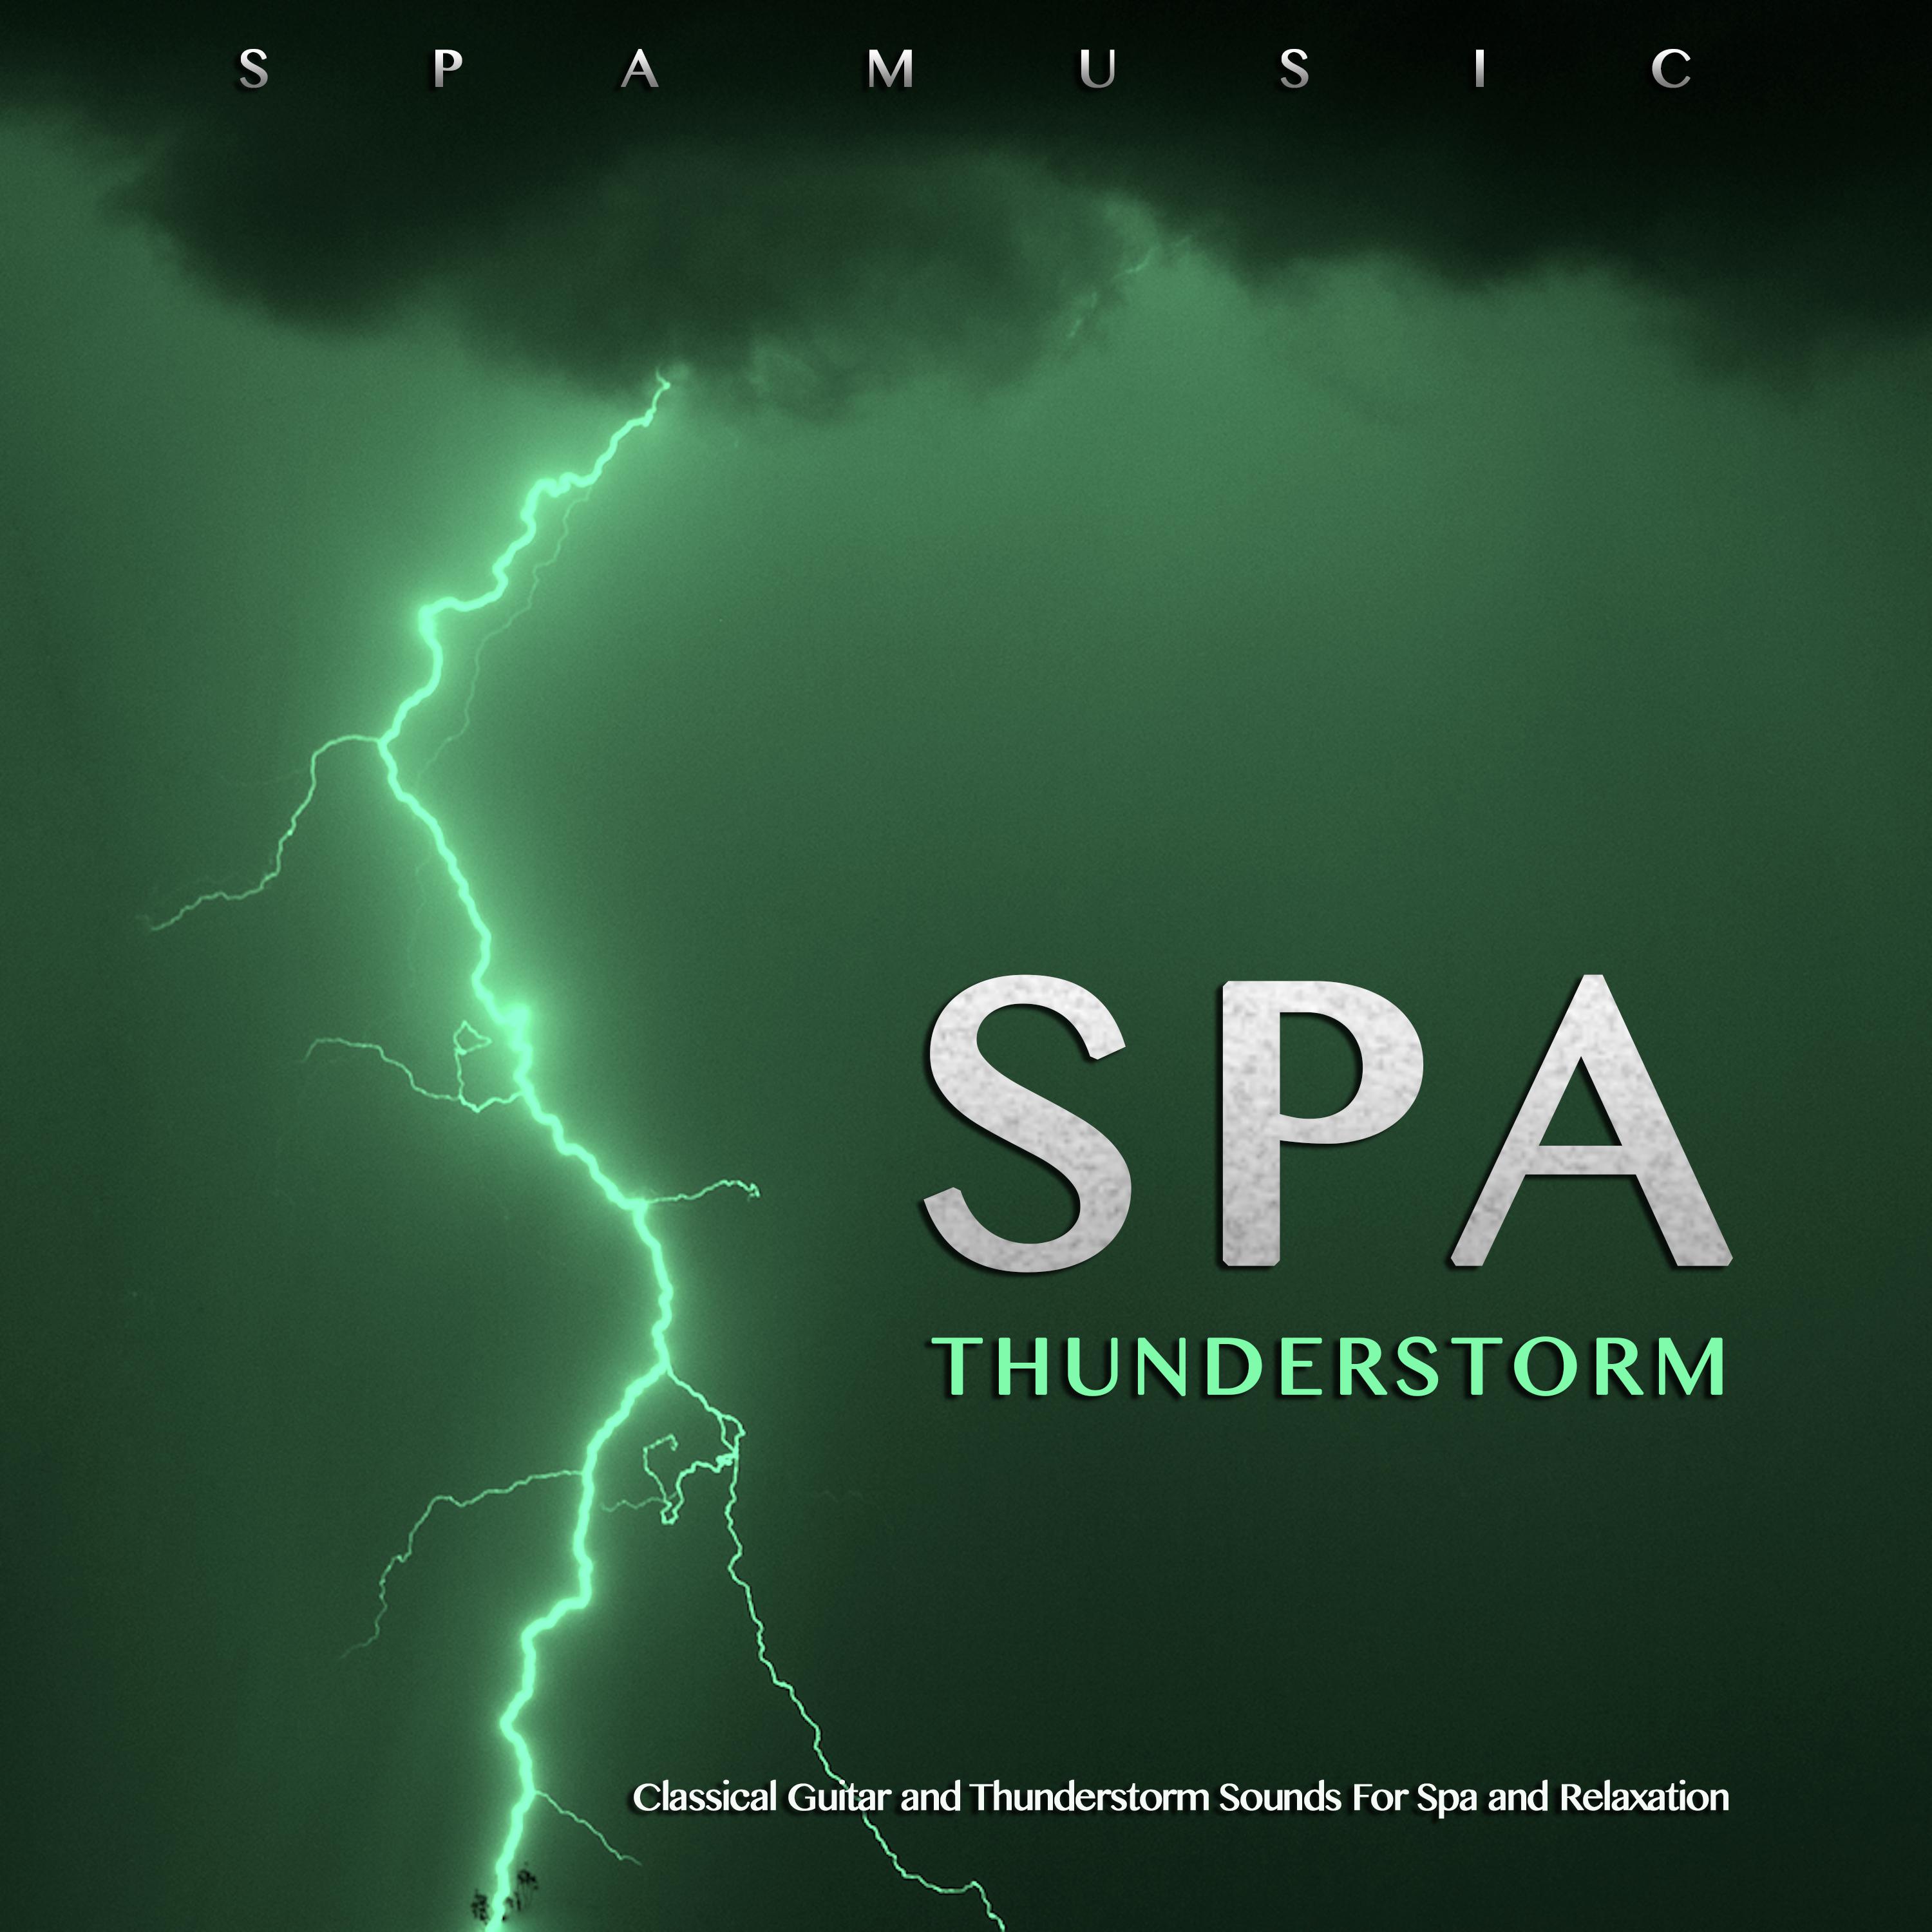 Spa Thunderstorm: Classical Guitar and Thunderstorm Sounds For Spa and Relaxation